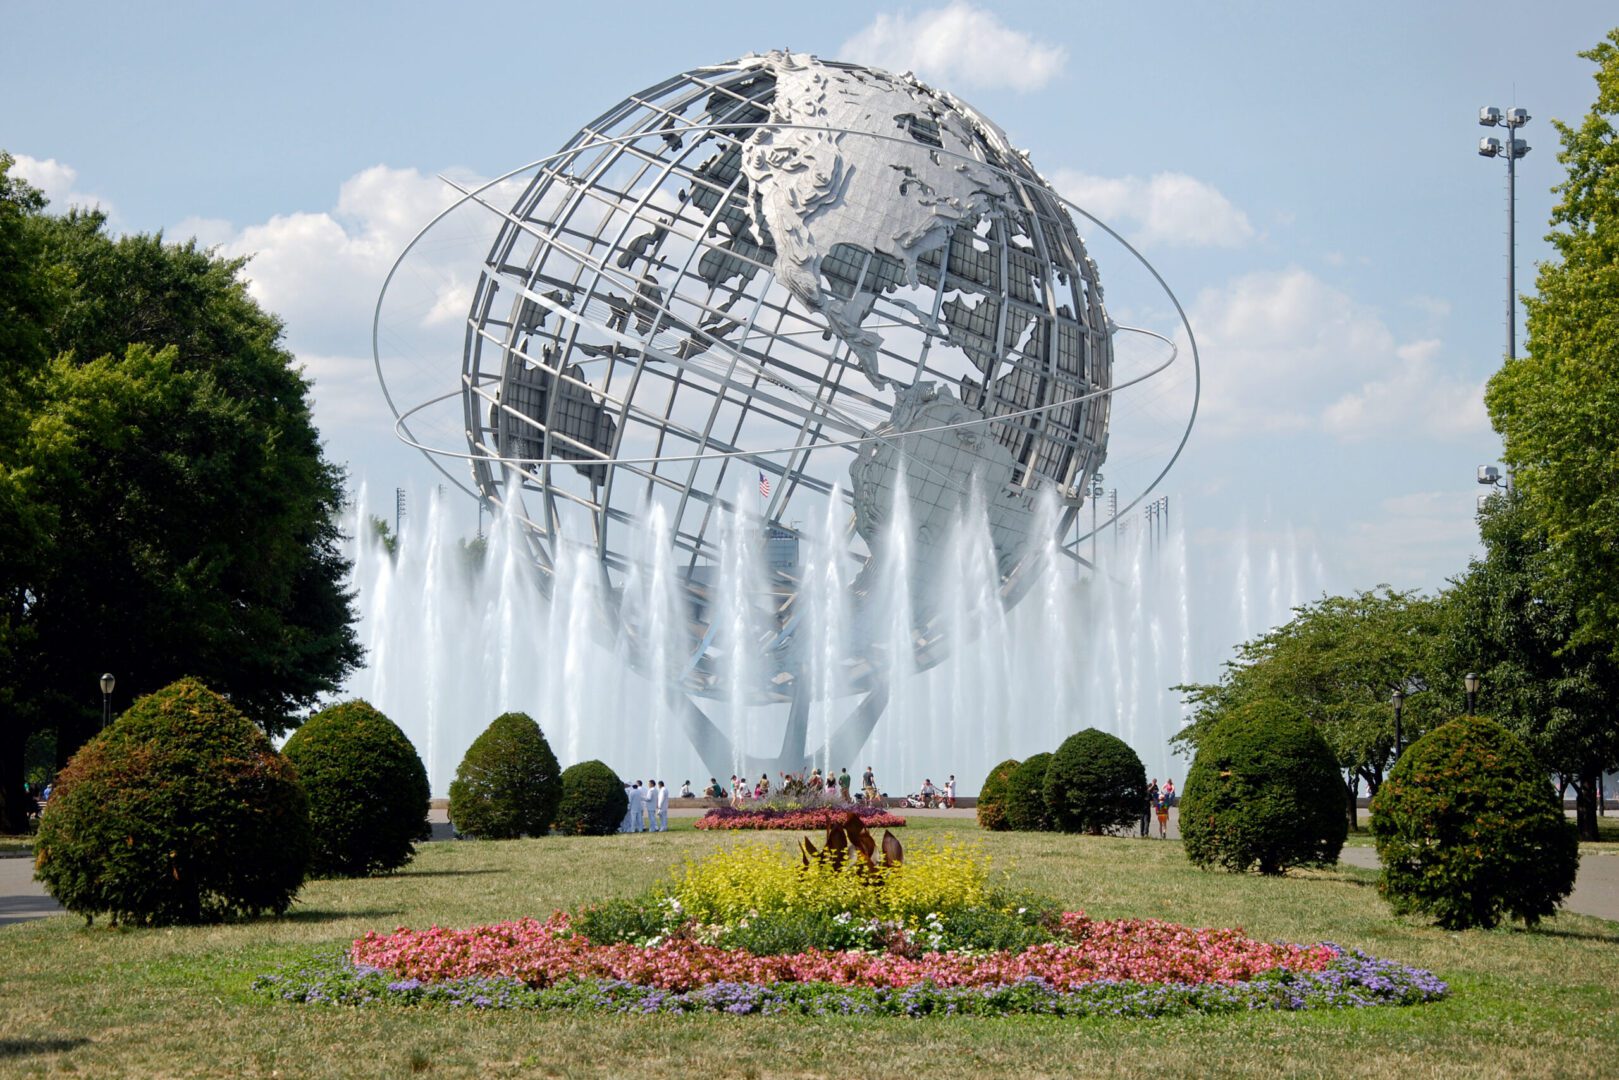 The unisphere, a spherical steel representation of the earth, located in flushing meadows–corona park in queens, new york, surrounded by fountains.